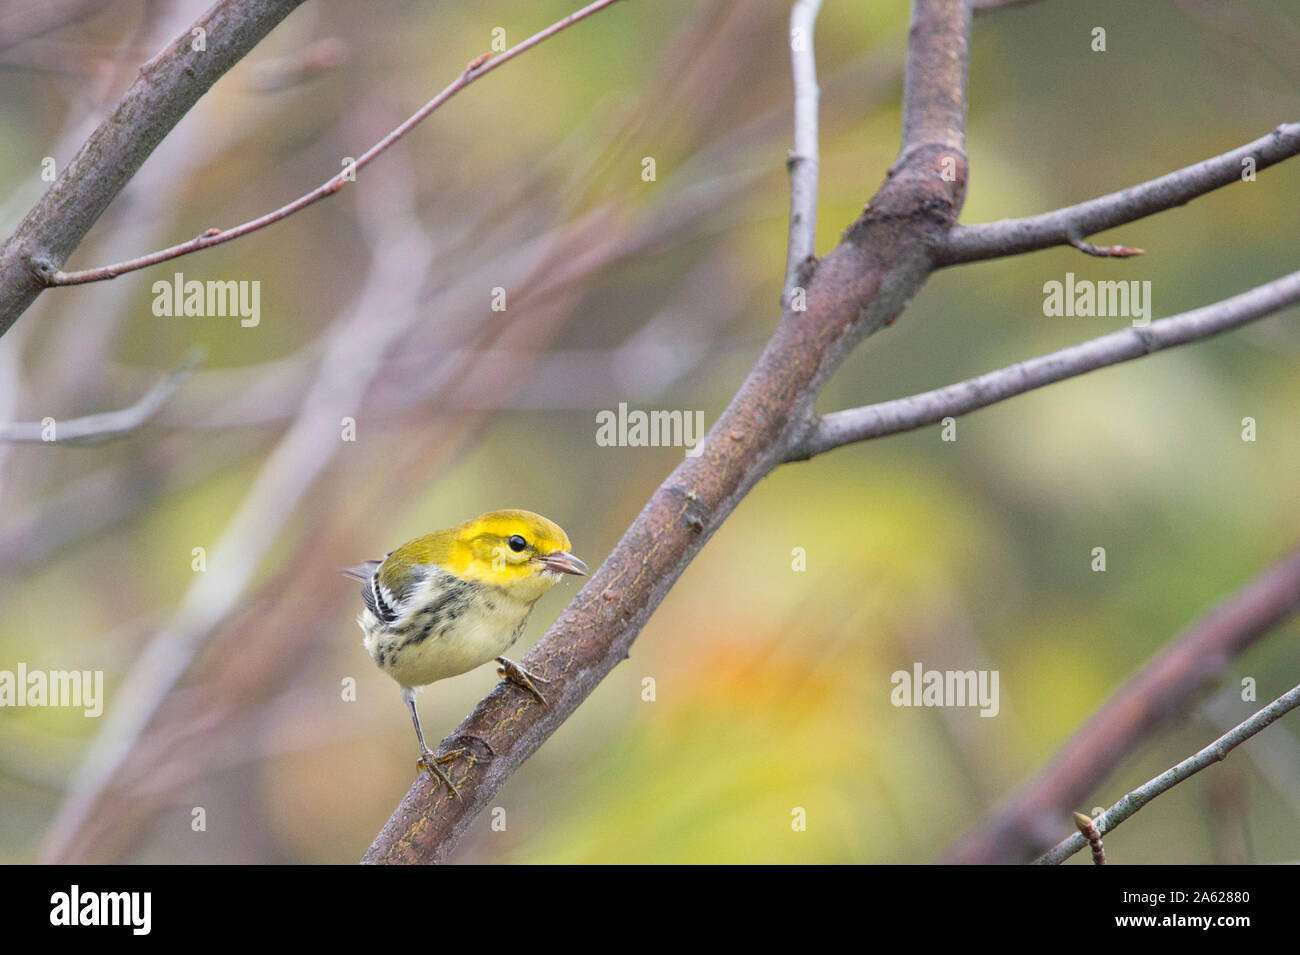 A Black-throated Green Warbler perched in a tree with green leaves in its fall non-breeding plumage. Stock Photo